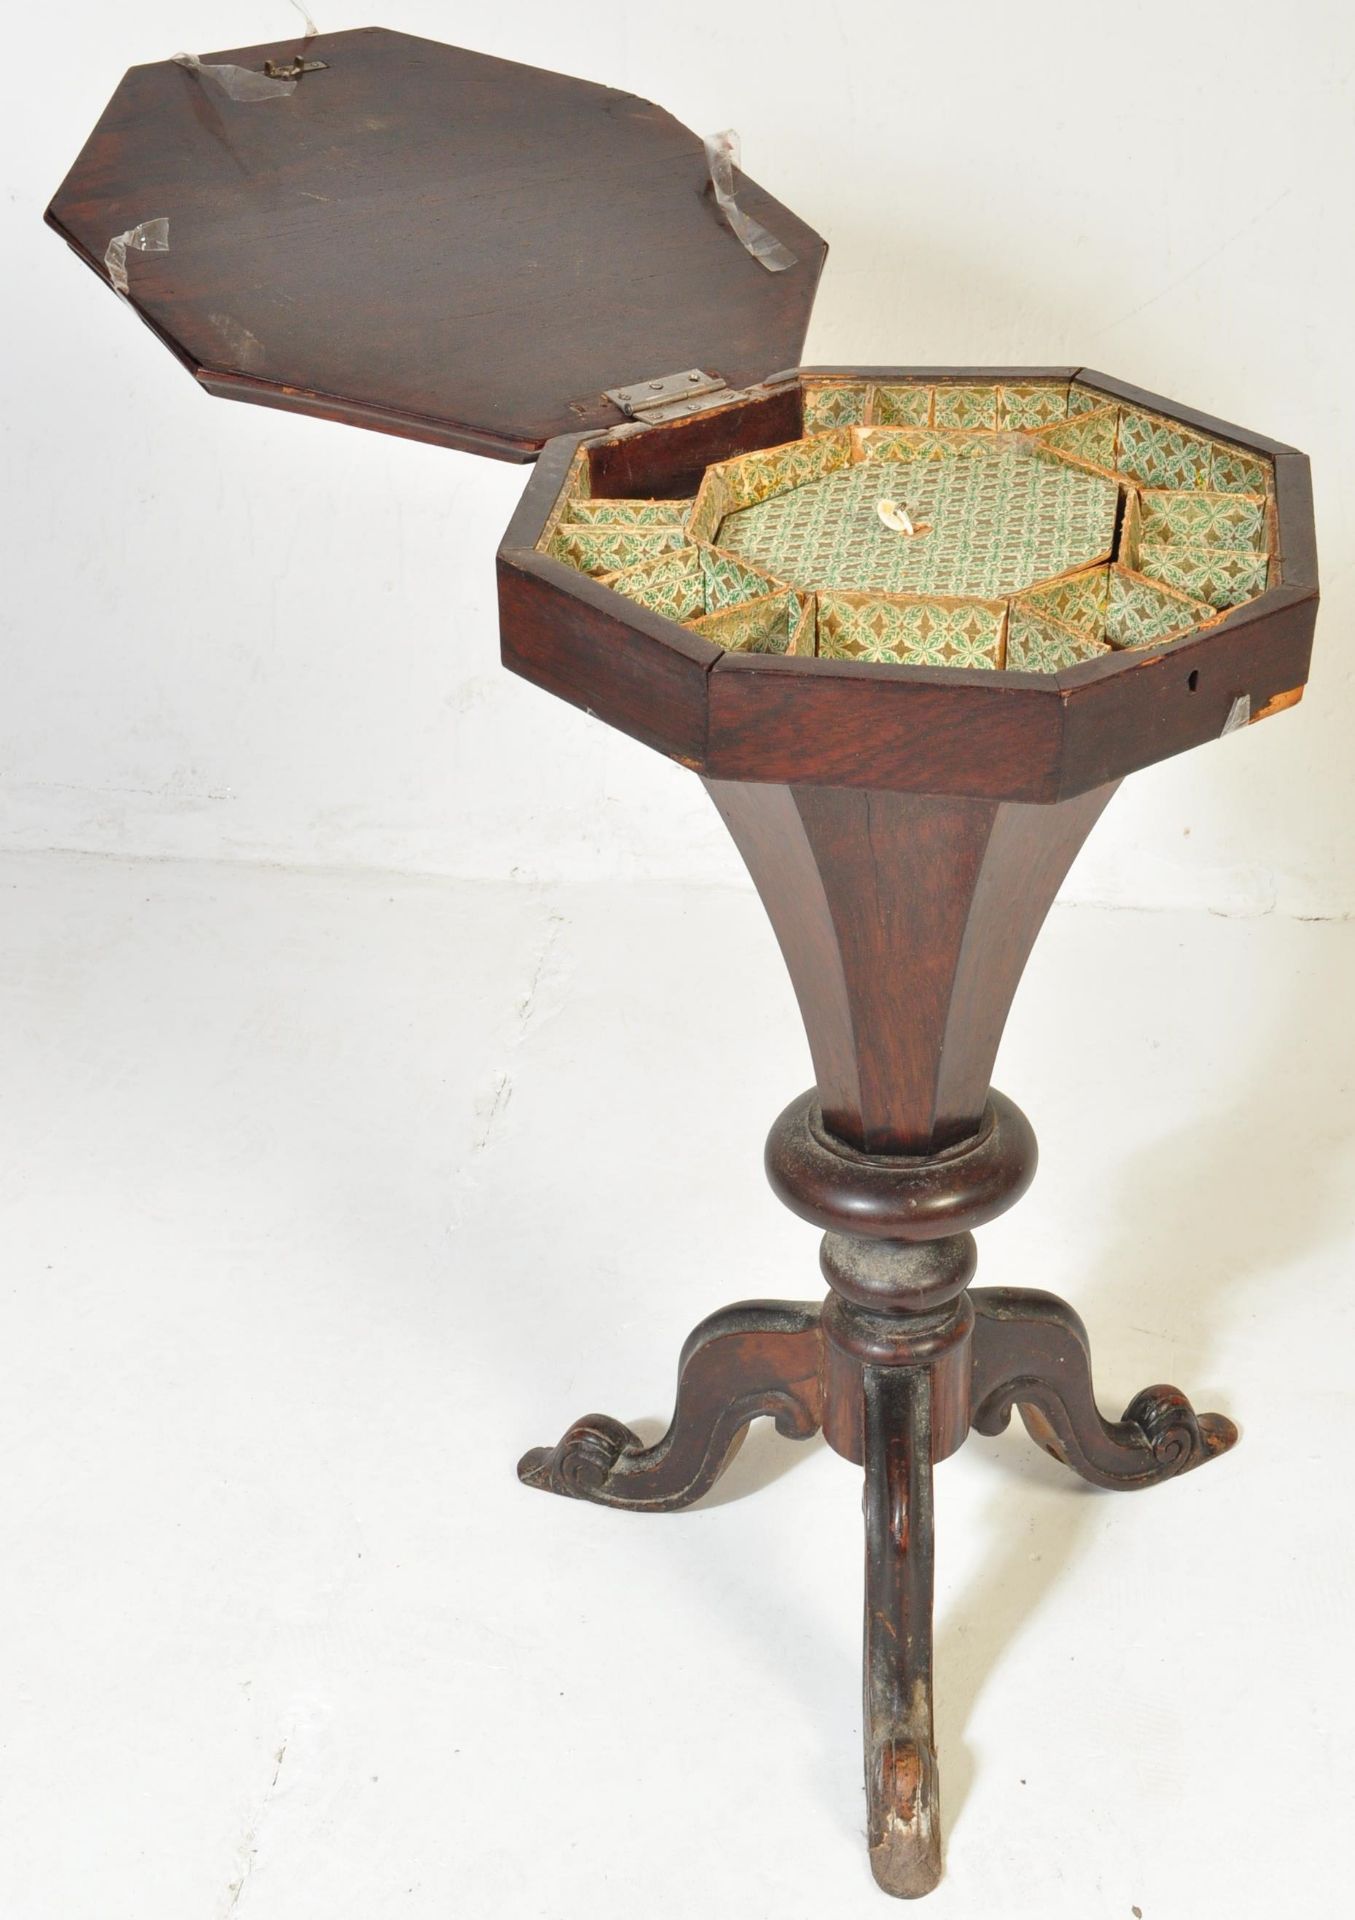 VICTORIAN 19TH CENTURY MARQUETRY INLAID WORK BOX TABLE - Image 3 of 7